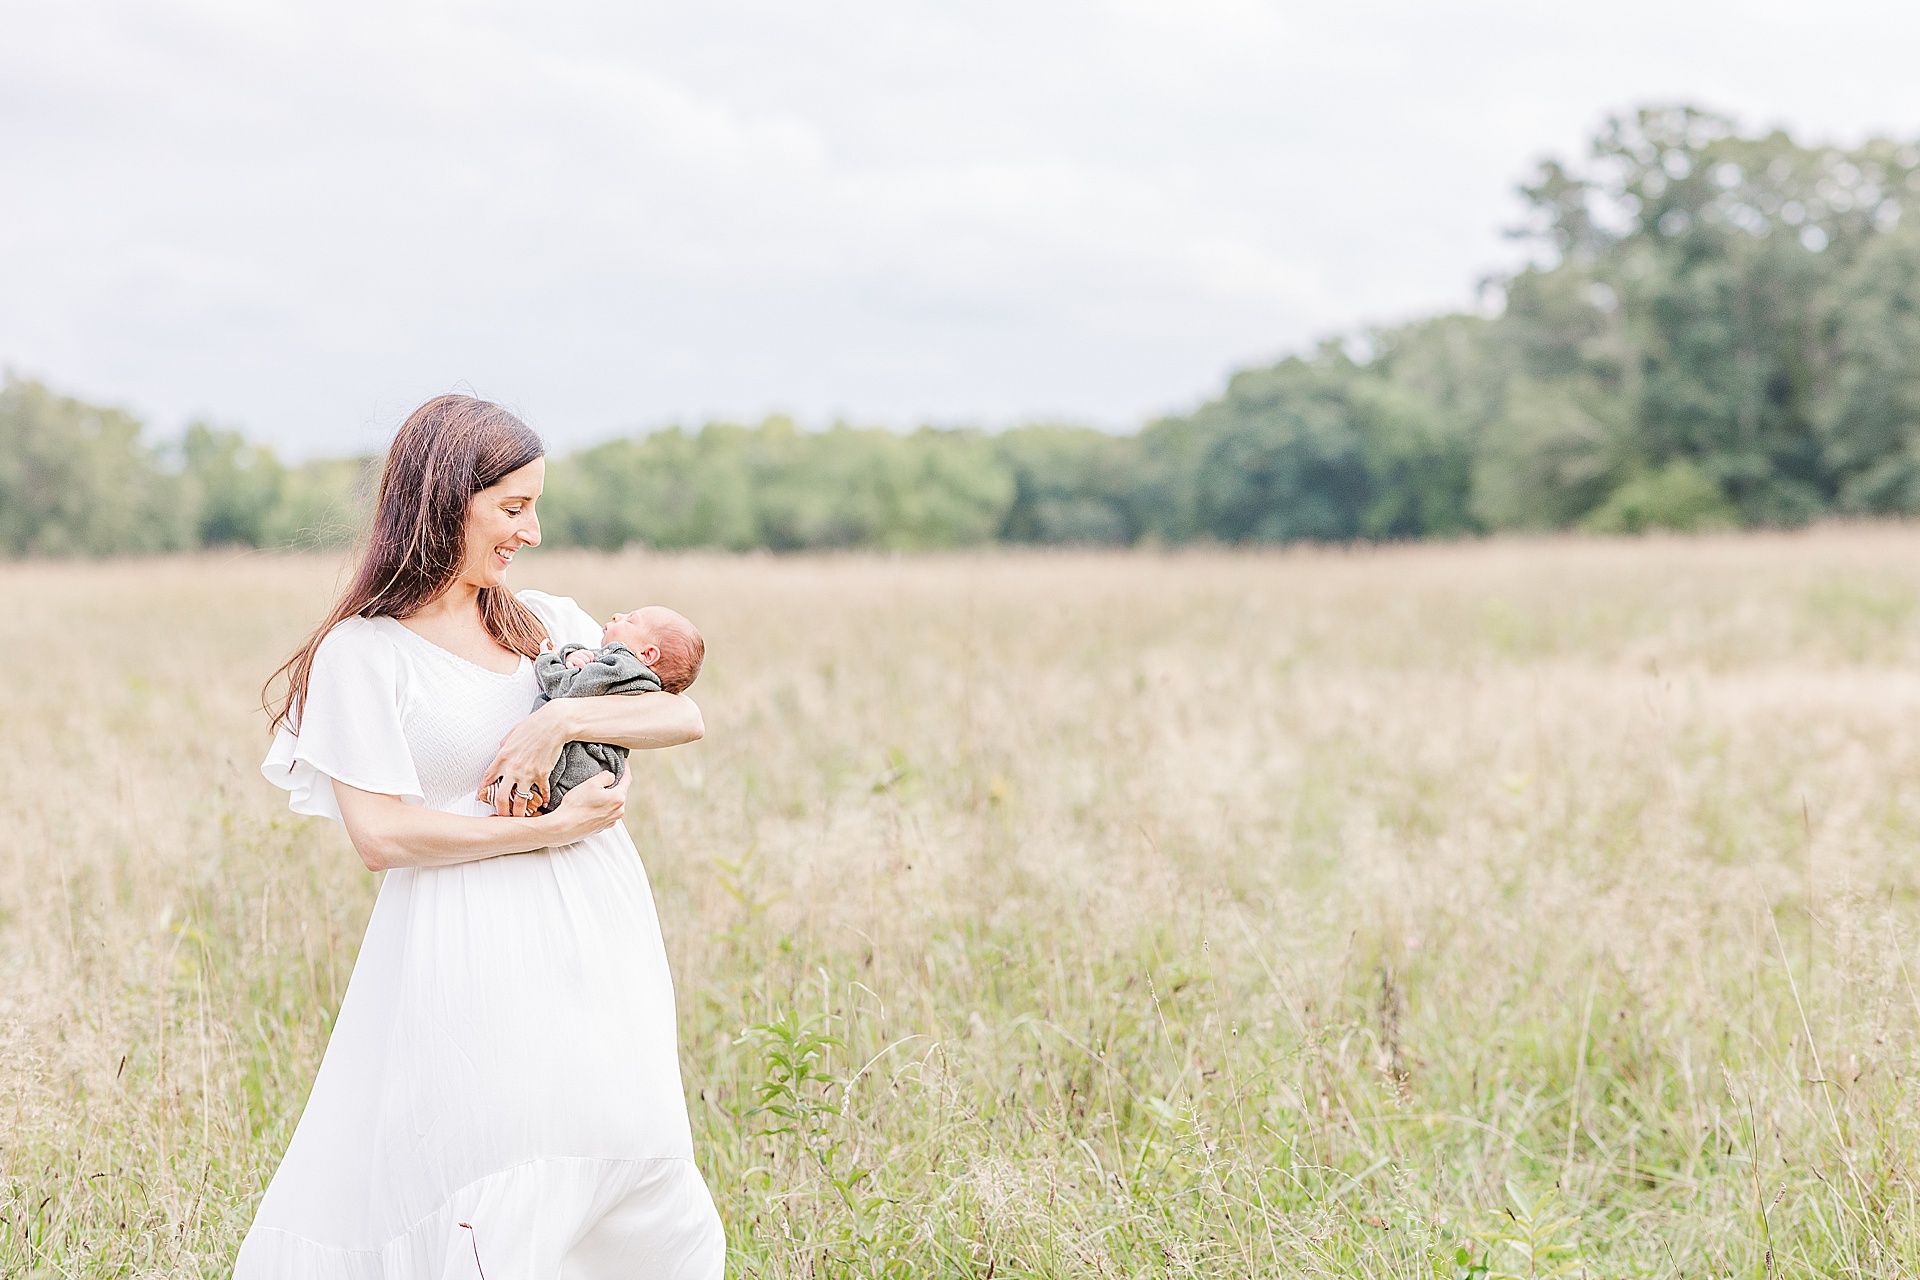 Mom stands in field smiling down at newborn baby during outdoor newborn photo session with Sara Sniderman Photography at Heard Farm, Wayland Massachusetts